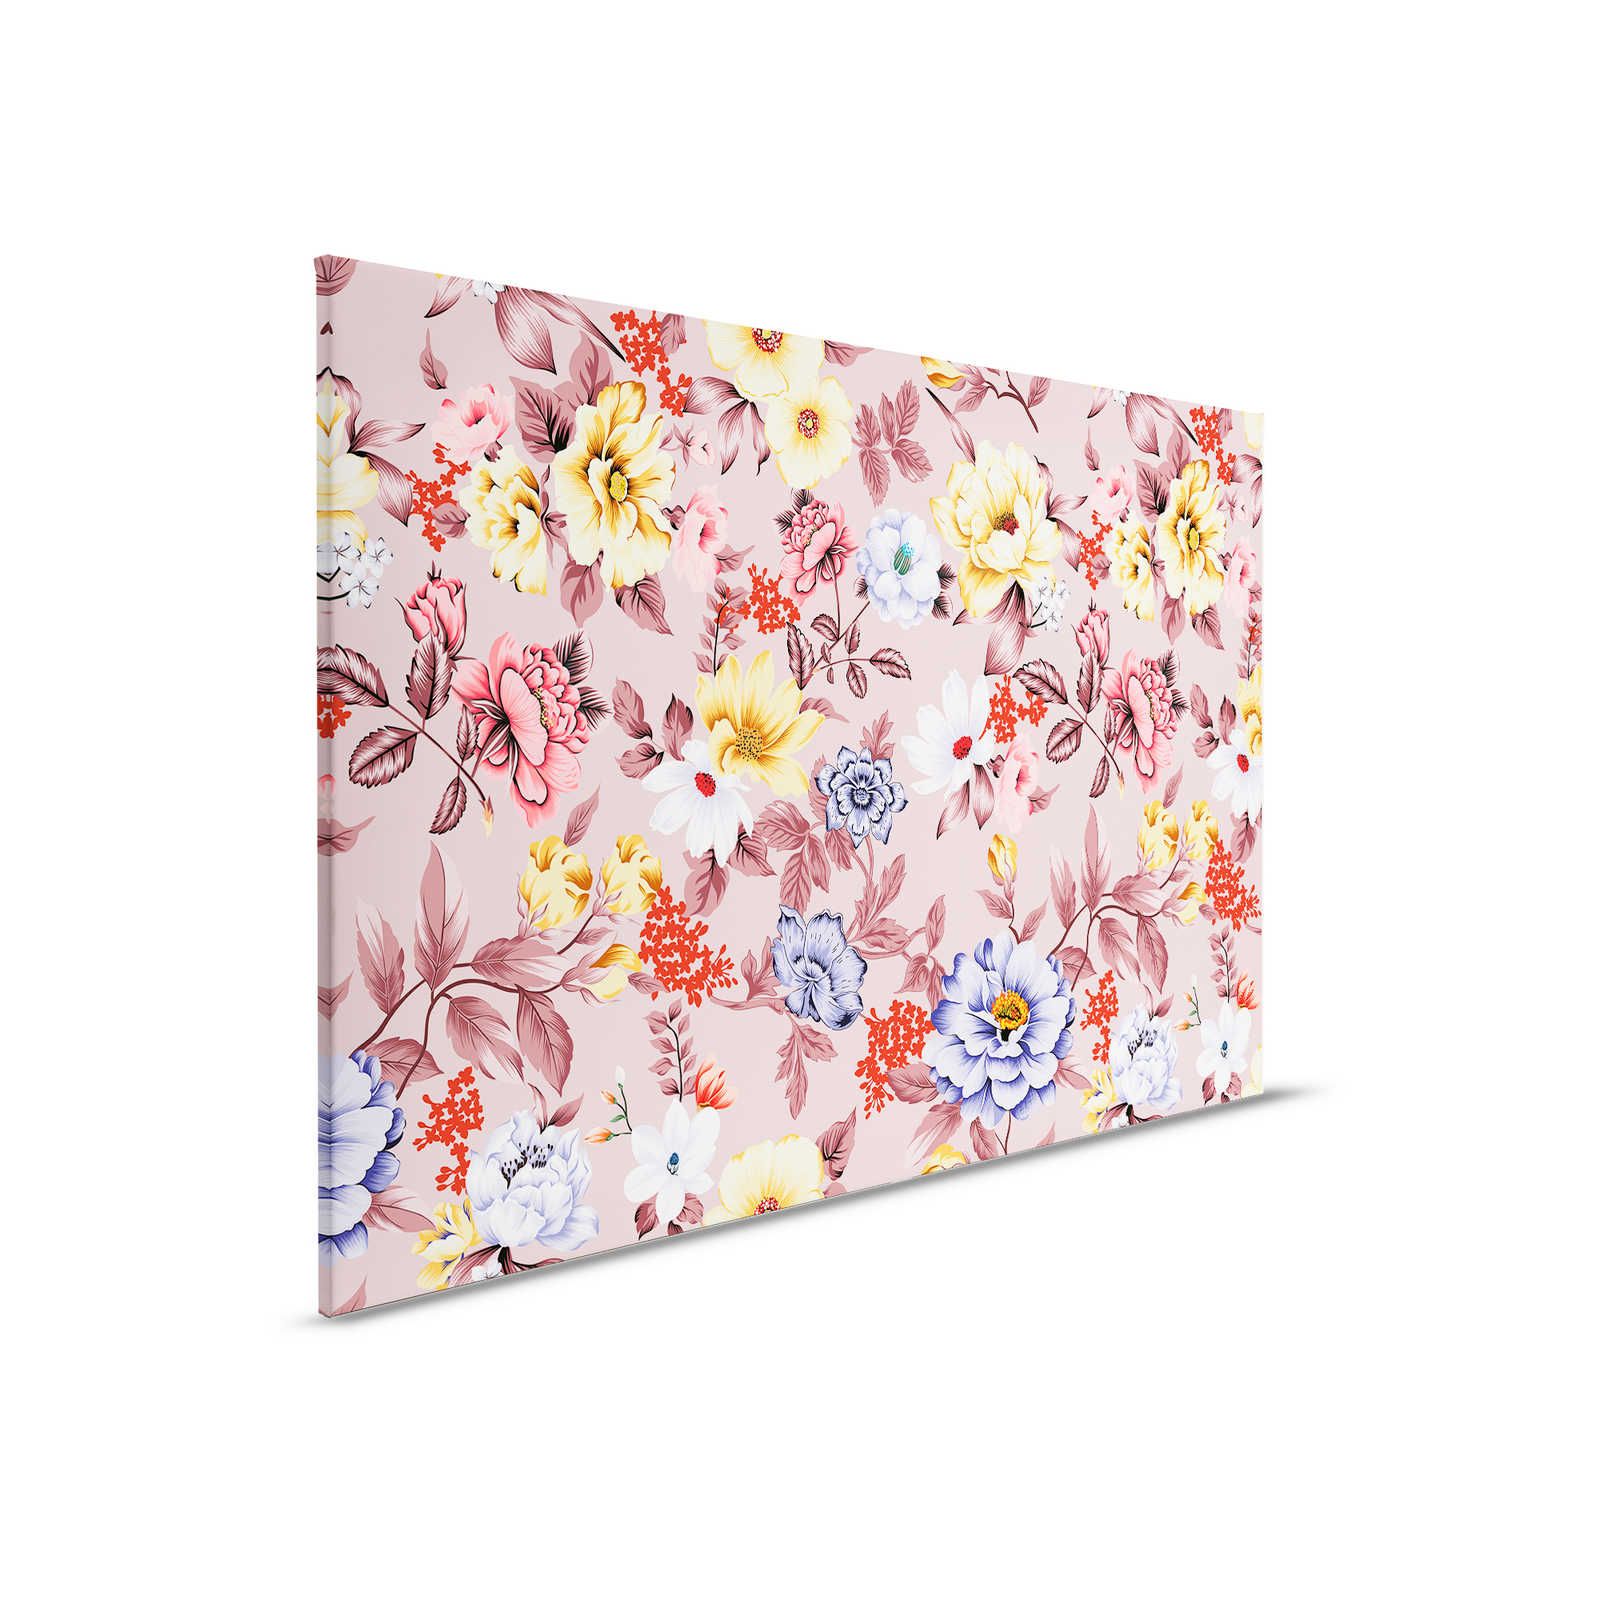         Canvas floral with flowers and leaves - 90 cm x 60 cm
    